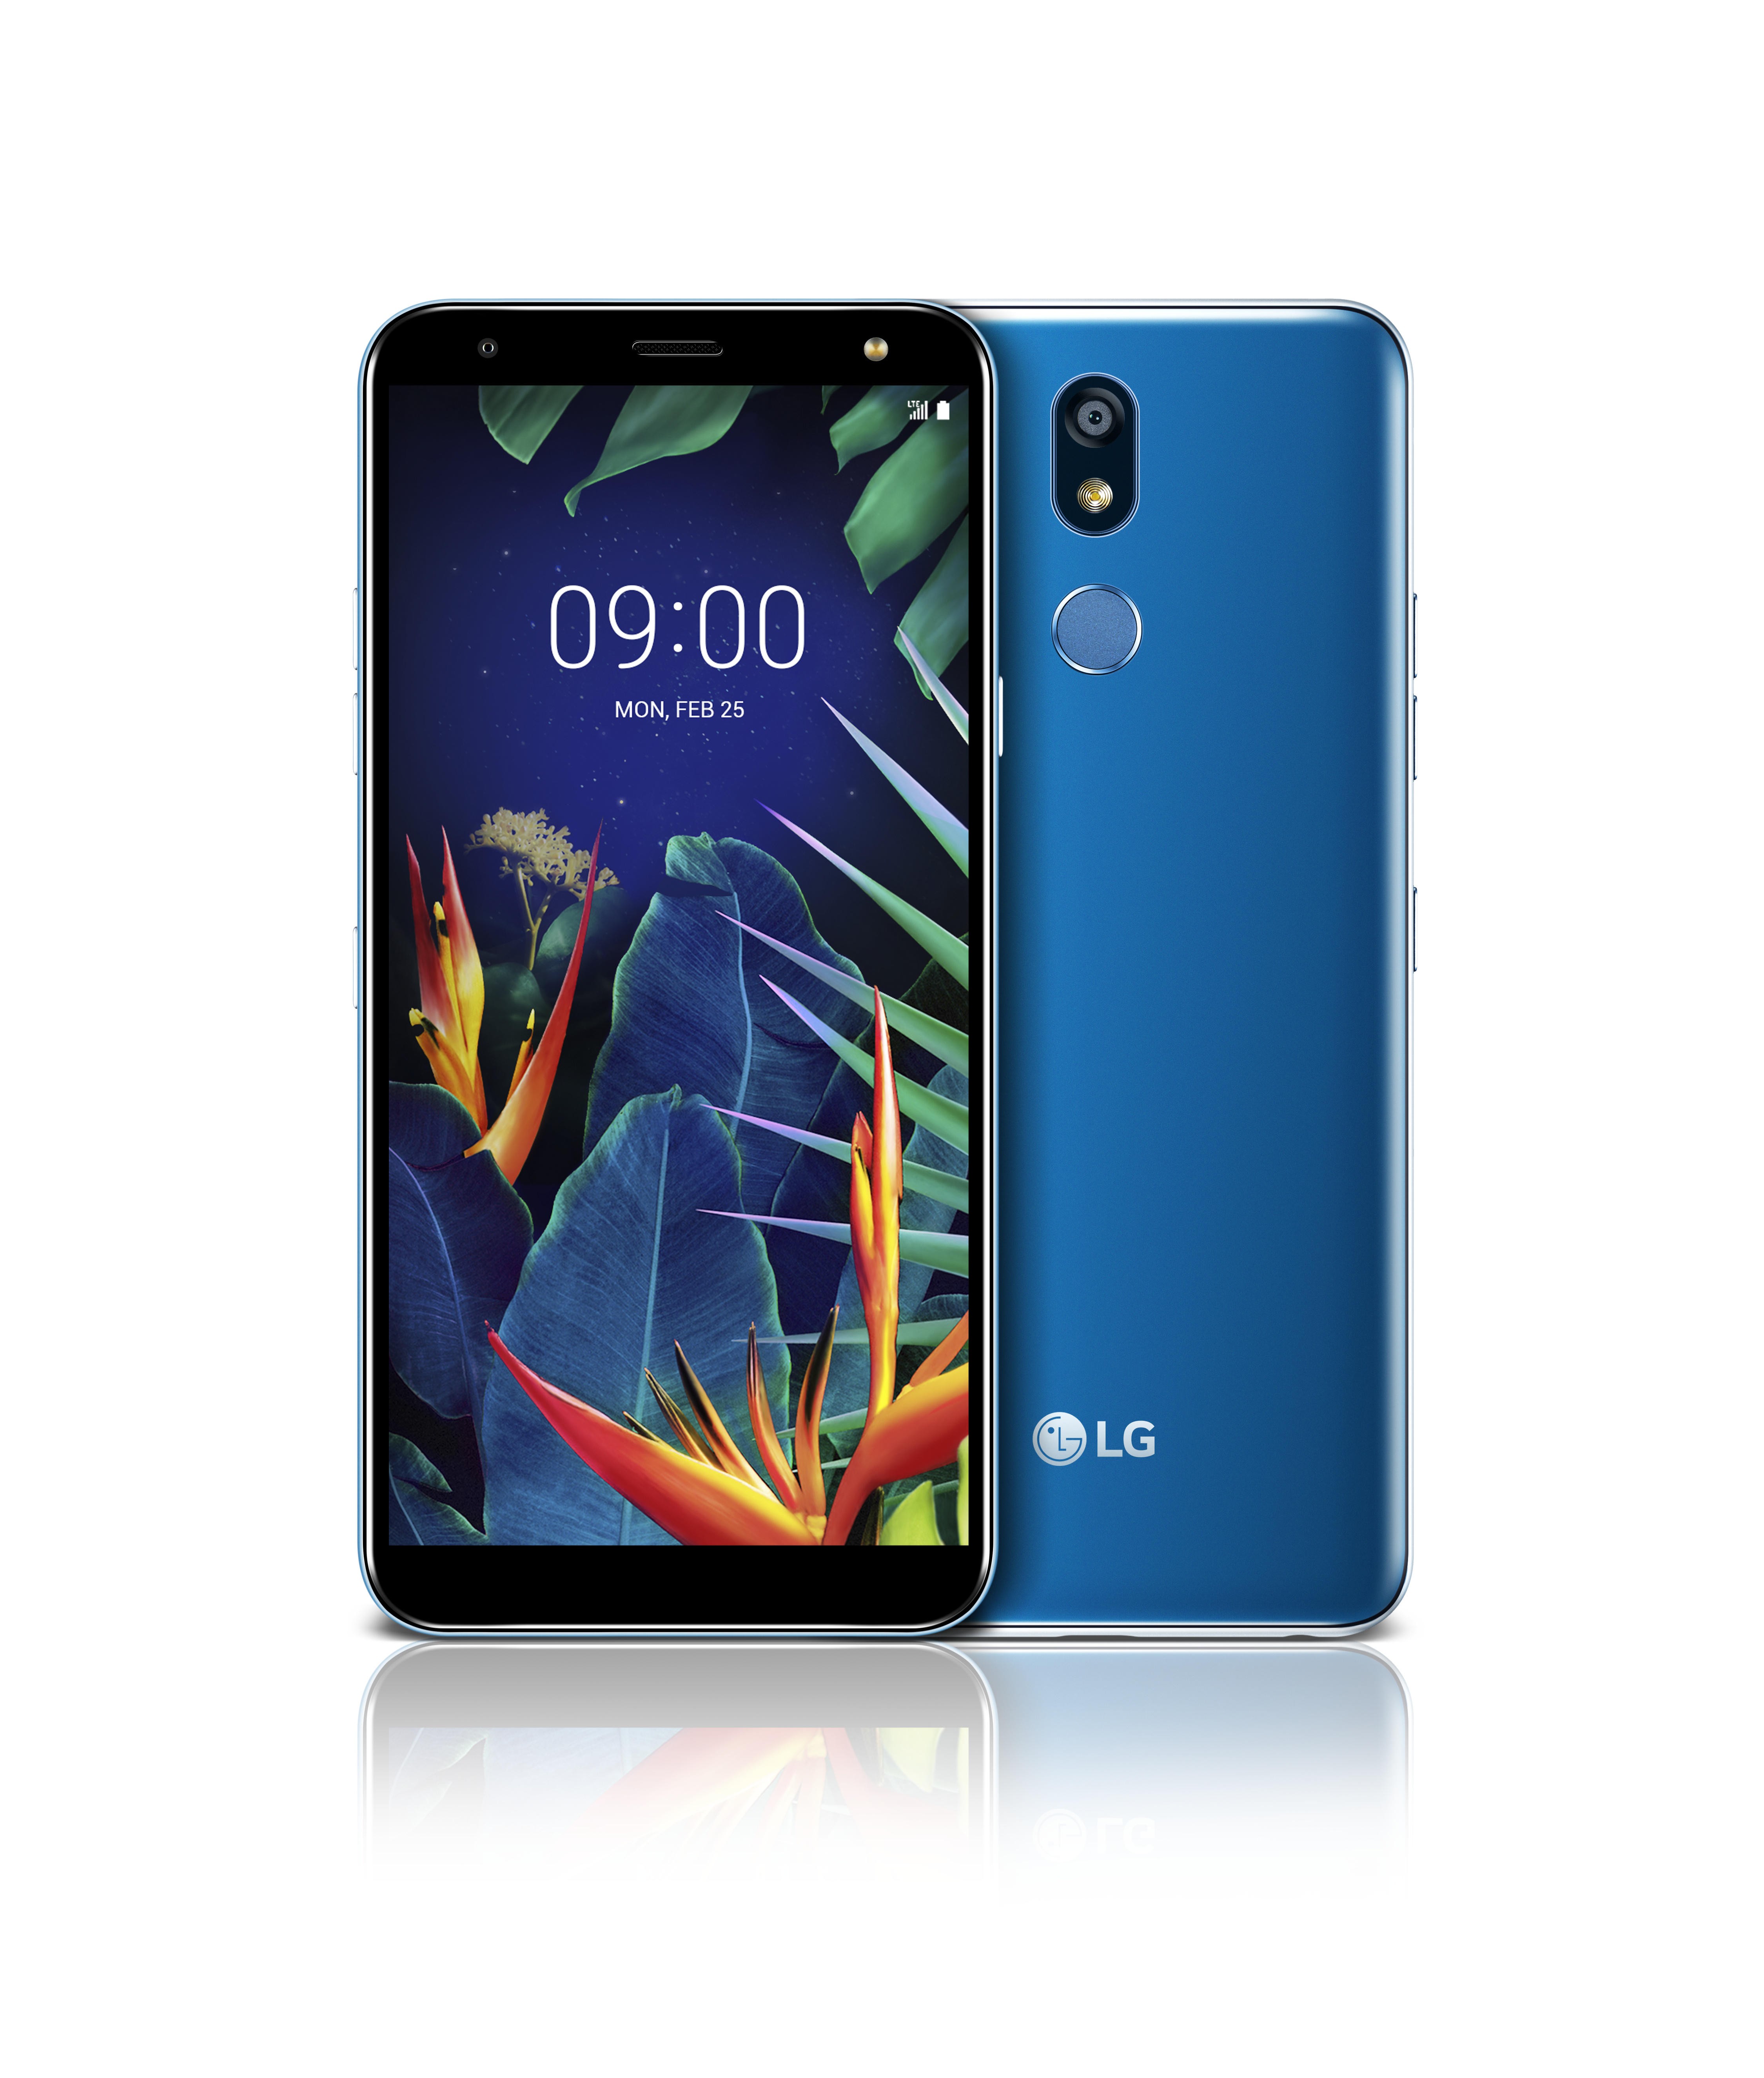 The front and rear view of the LG K40 in New Moroccan Blue